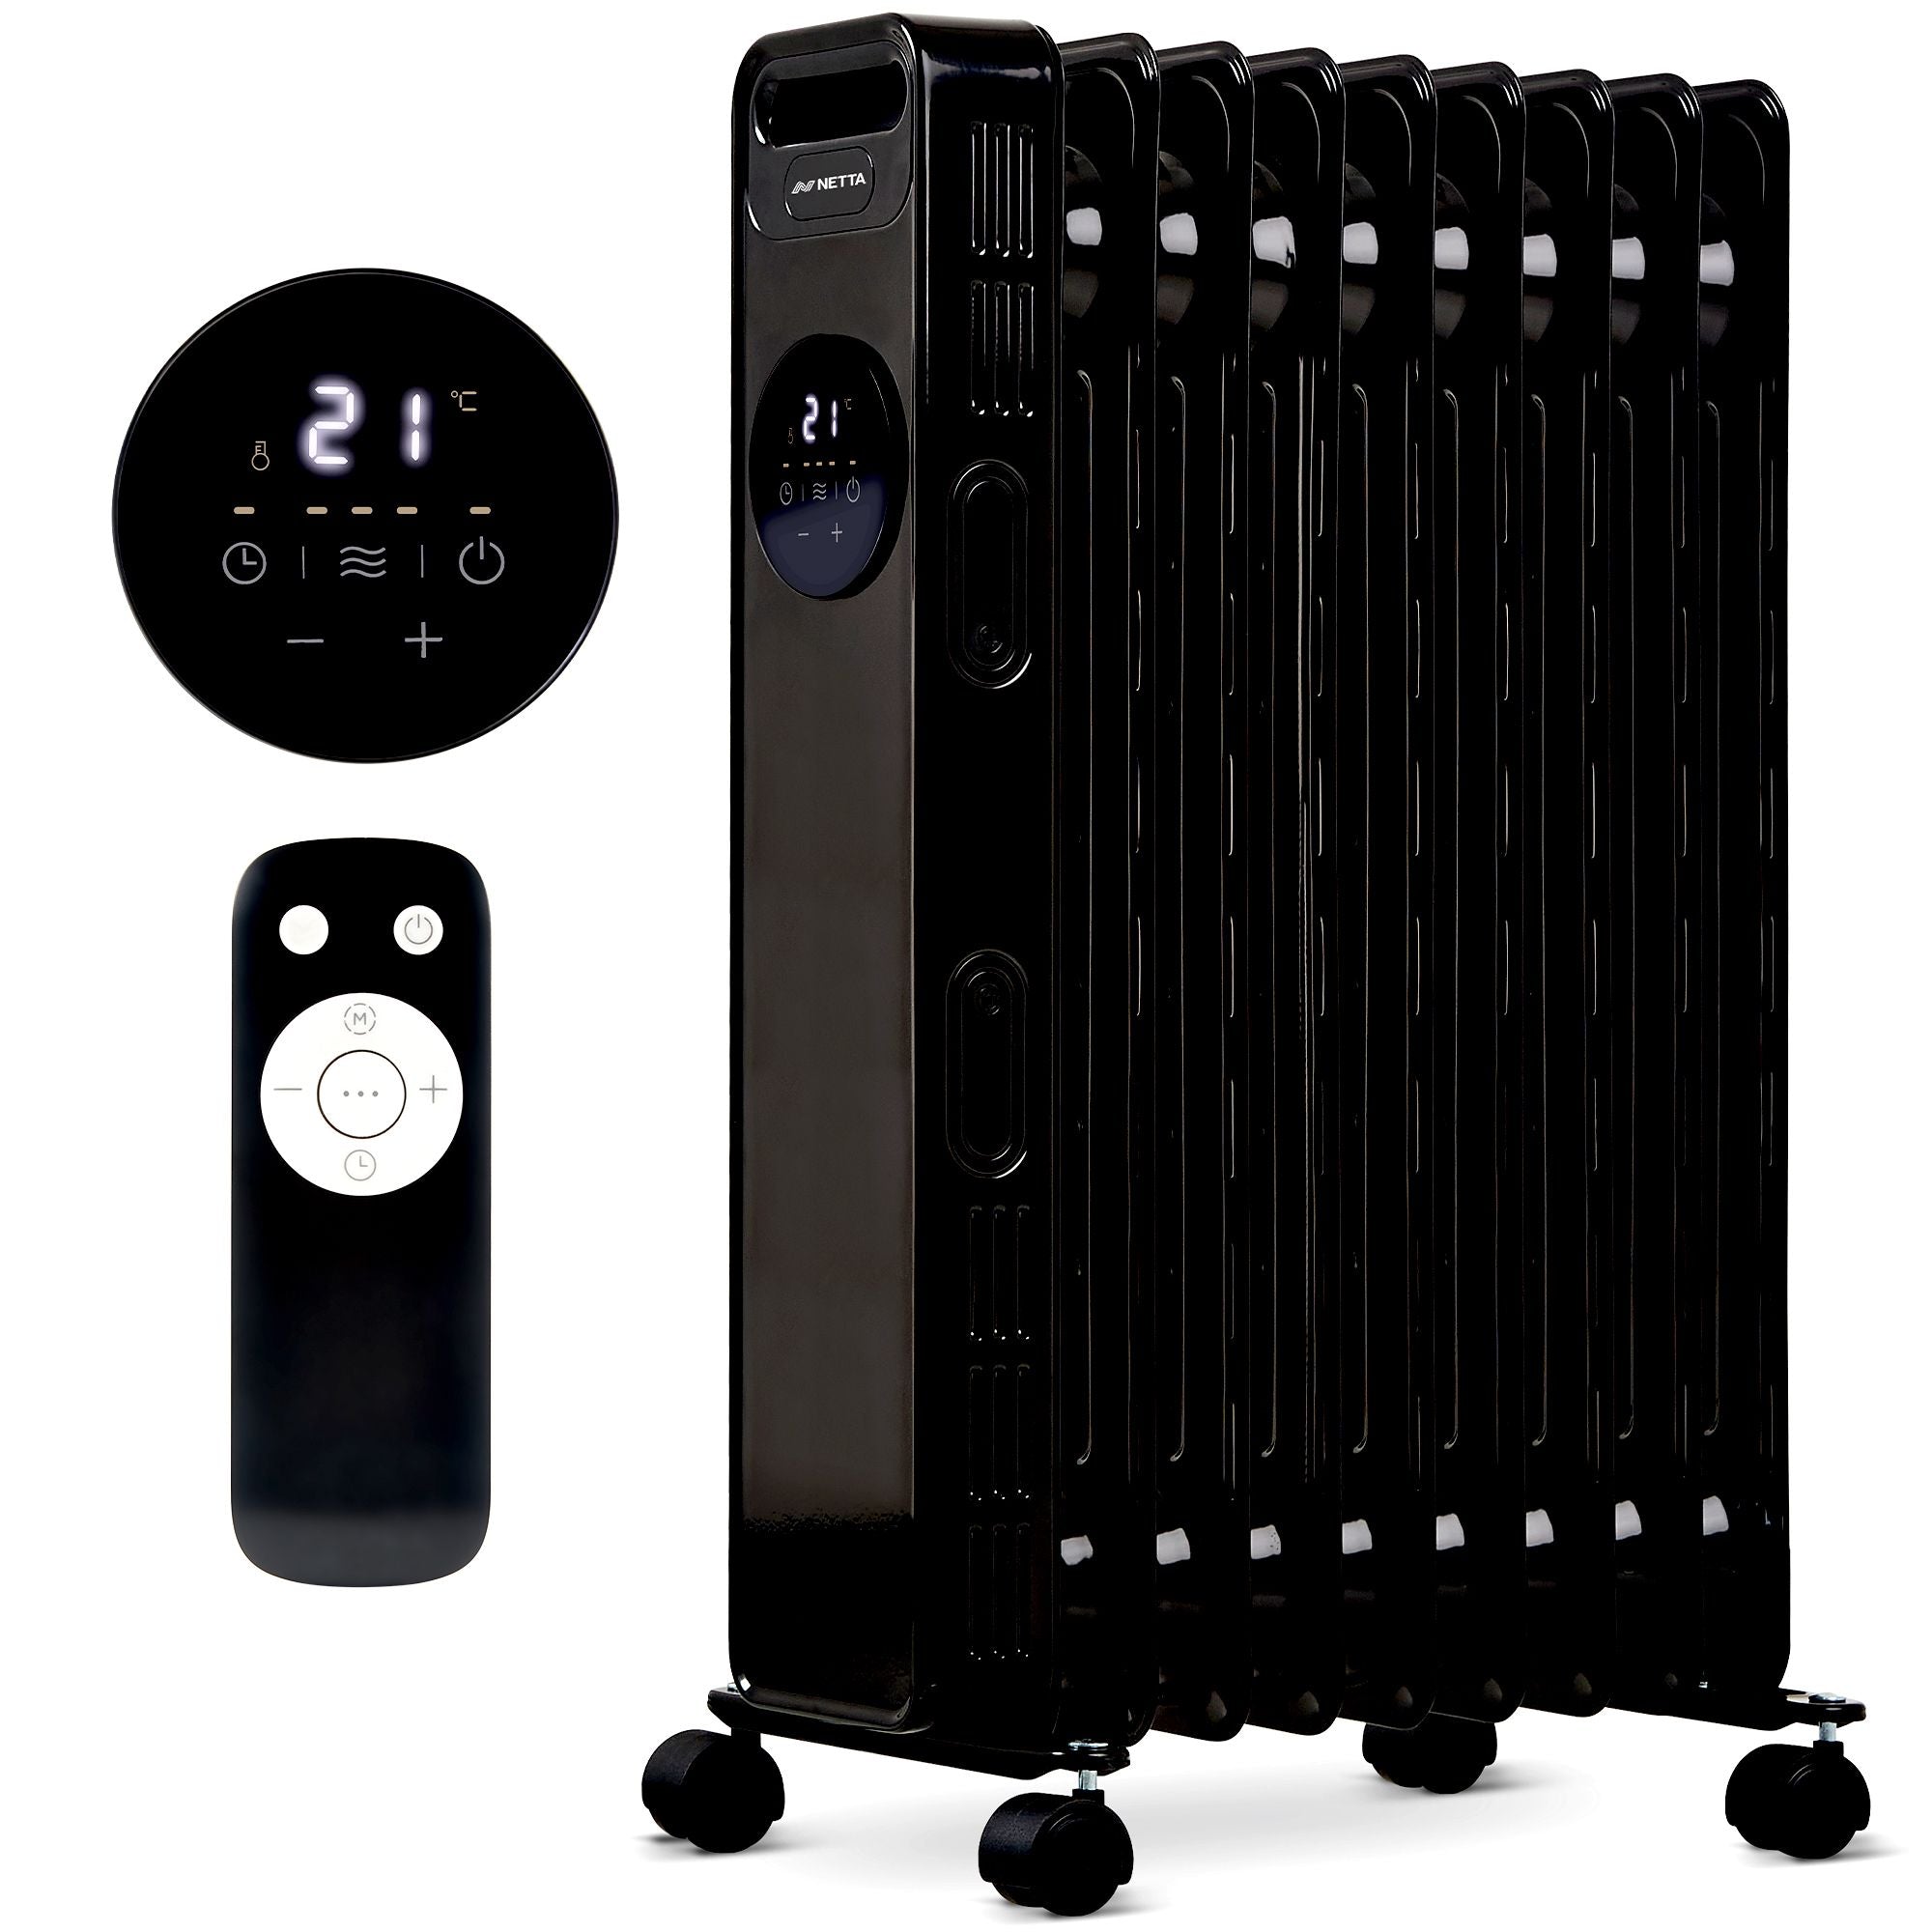 NETTA 2000W 9 Fin Oil Filled Radiator with Timer & Remote Control - Black